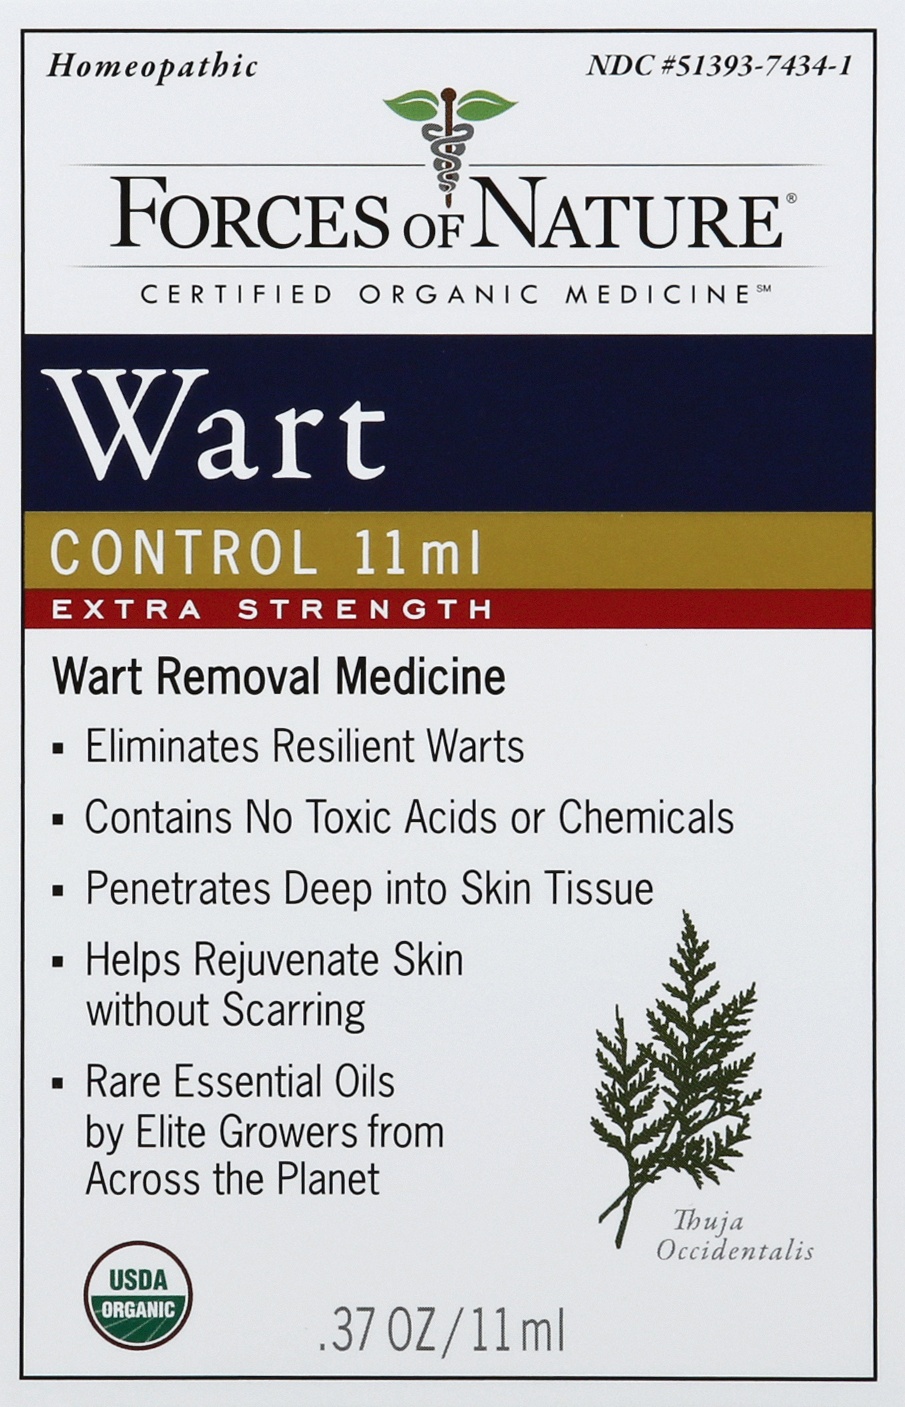 slide 1 of 1, Forces of Nature Wart Extra Strength Organic, 11 ml